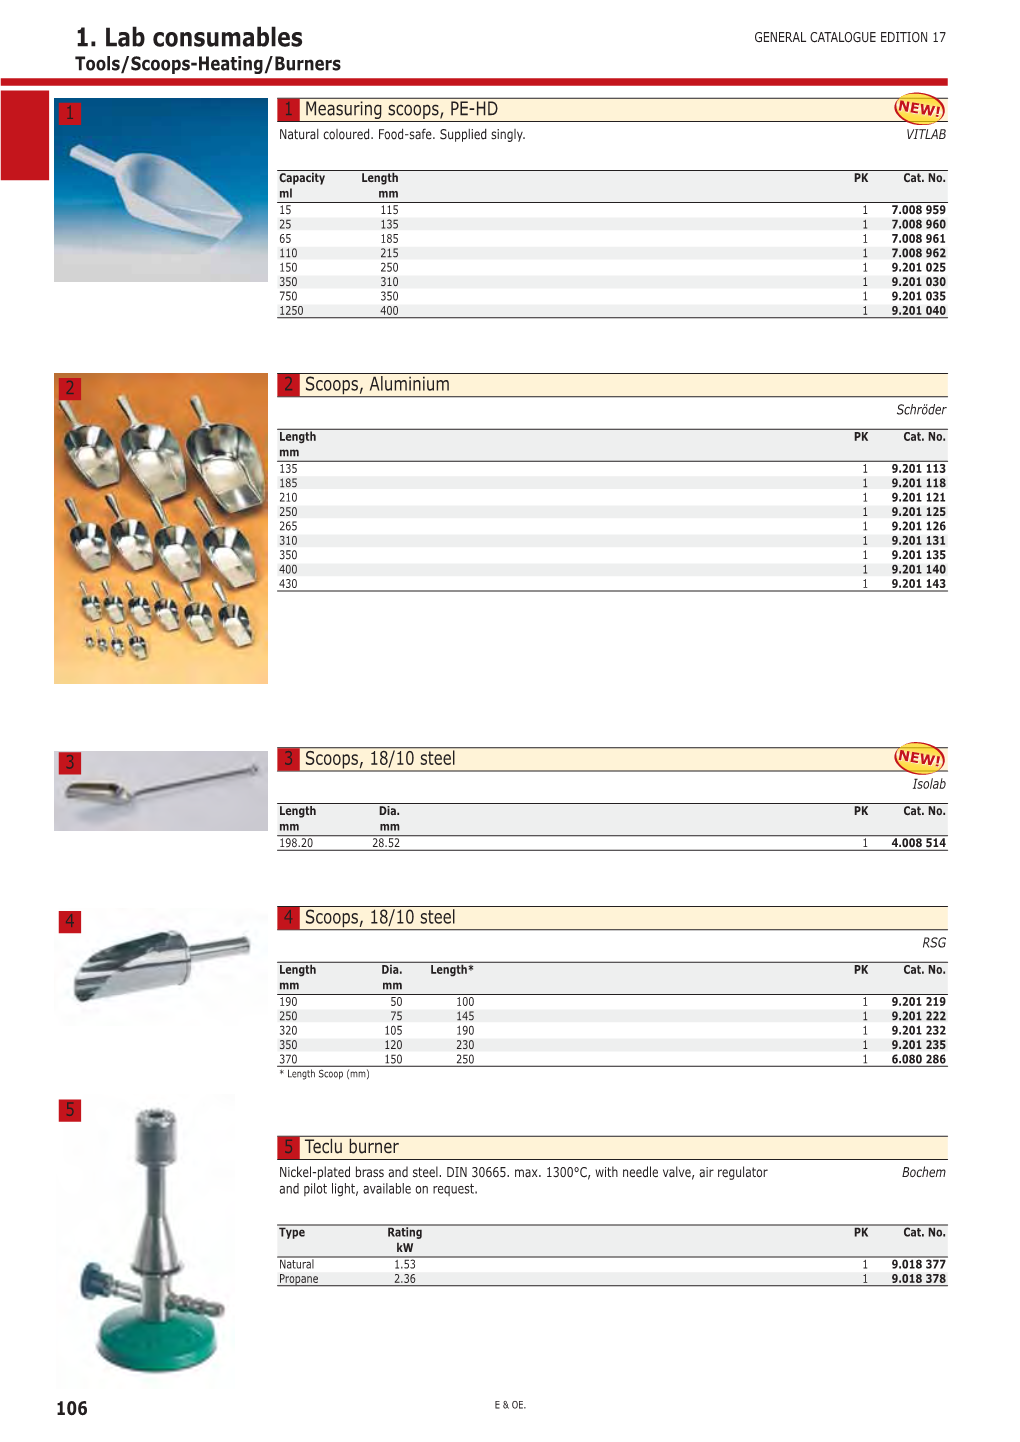 1. Lab Consumables GENERAL CATALOGUE EDITION 17 Tools/Scoops-Heating/Burners